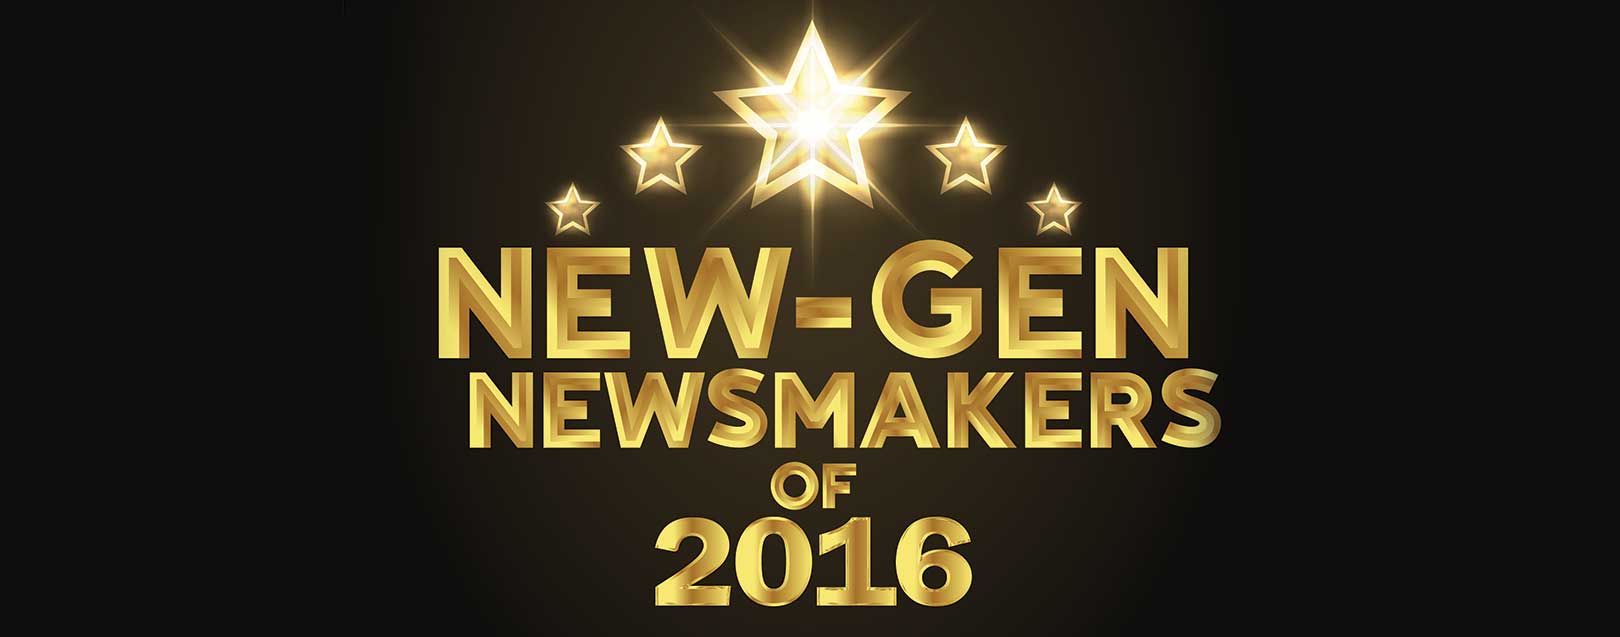 New-Gen Newsmakers March 2018 issue